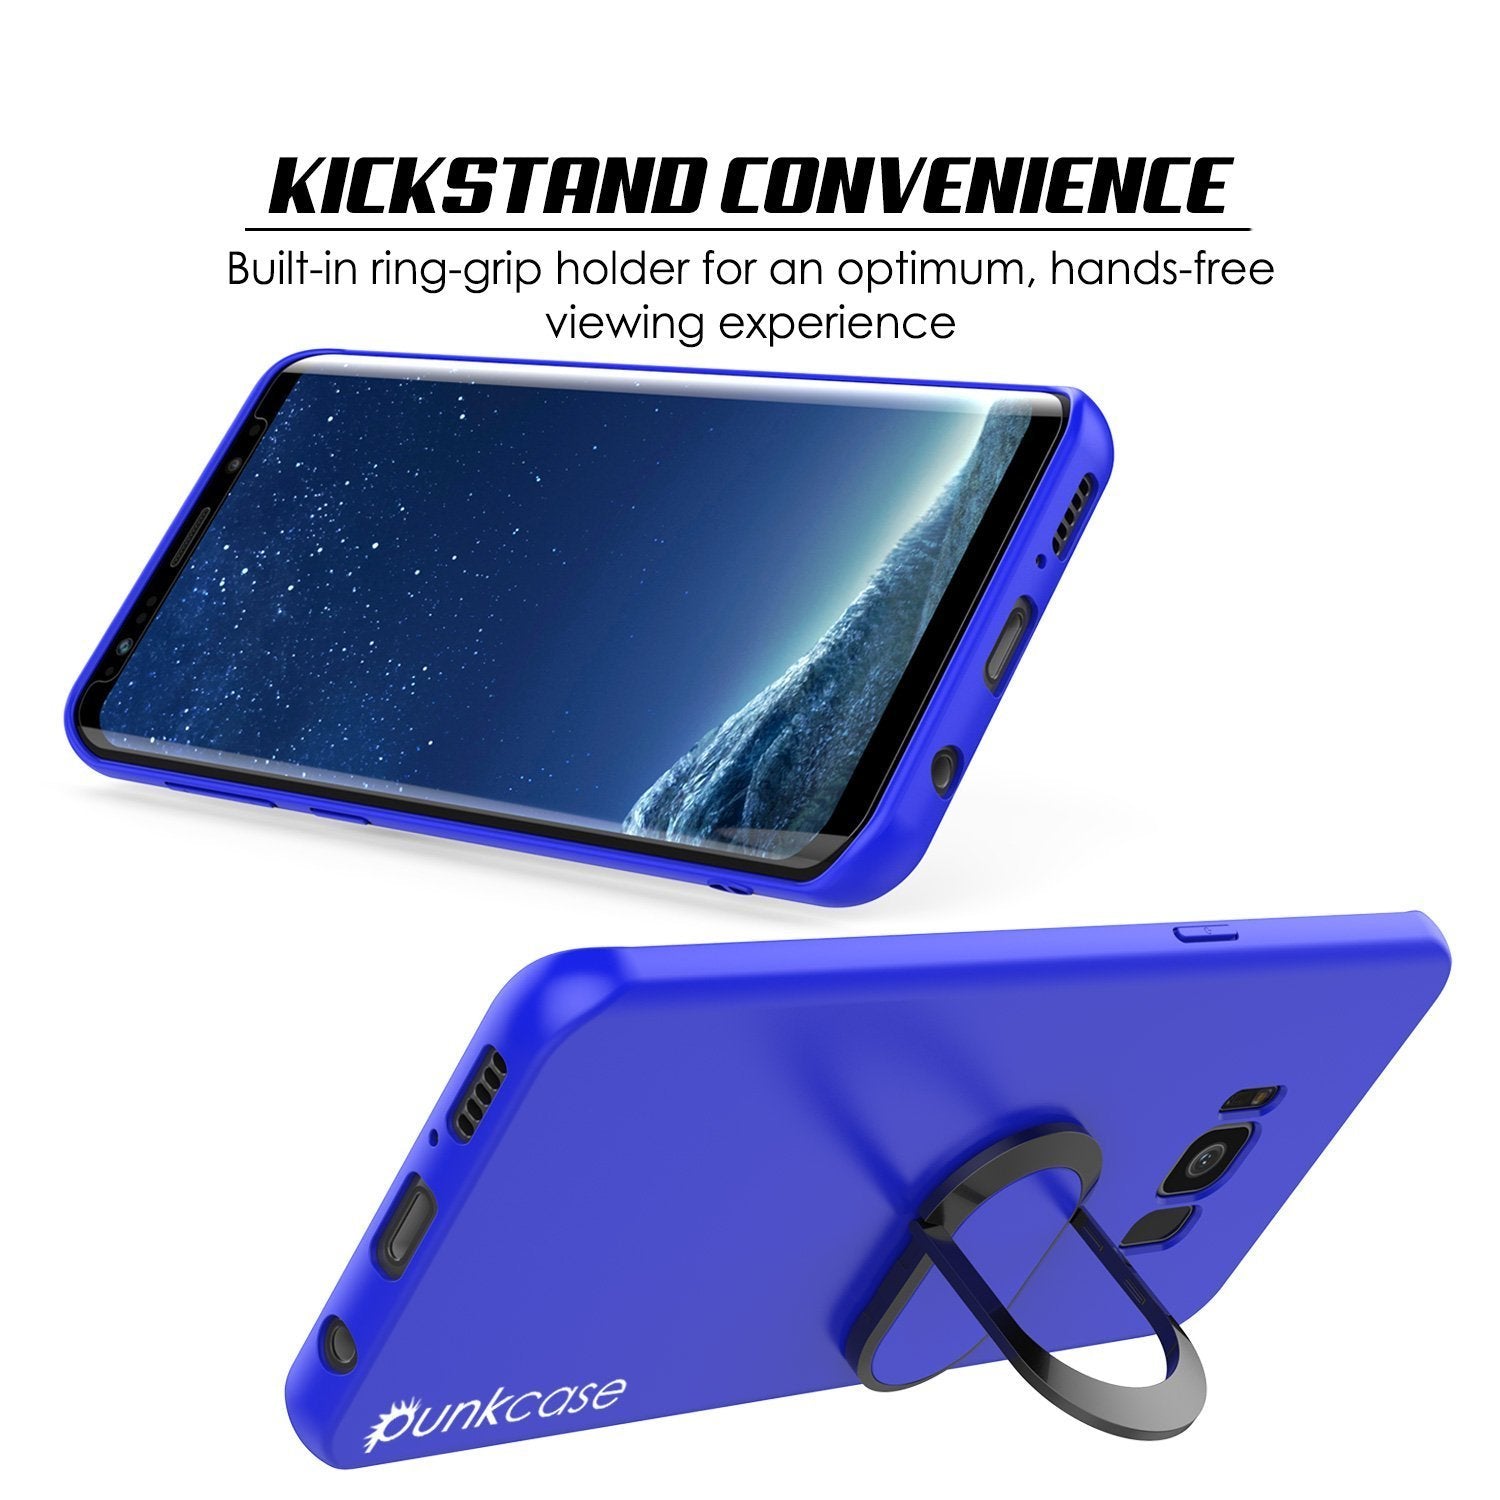 Galaxy S8 Case, Punkcase Magnetix Protective TPU Cover W/ Kickstand, Screen Protector [Blue] - PunkCase NZ